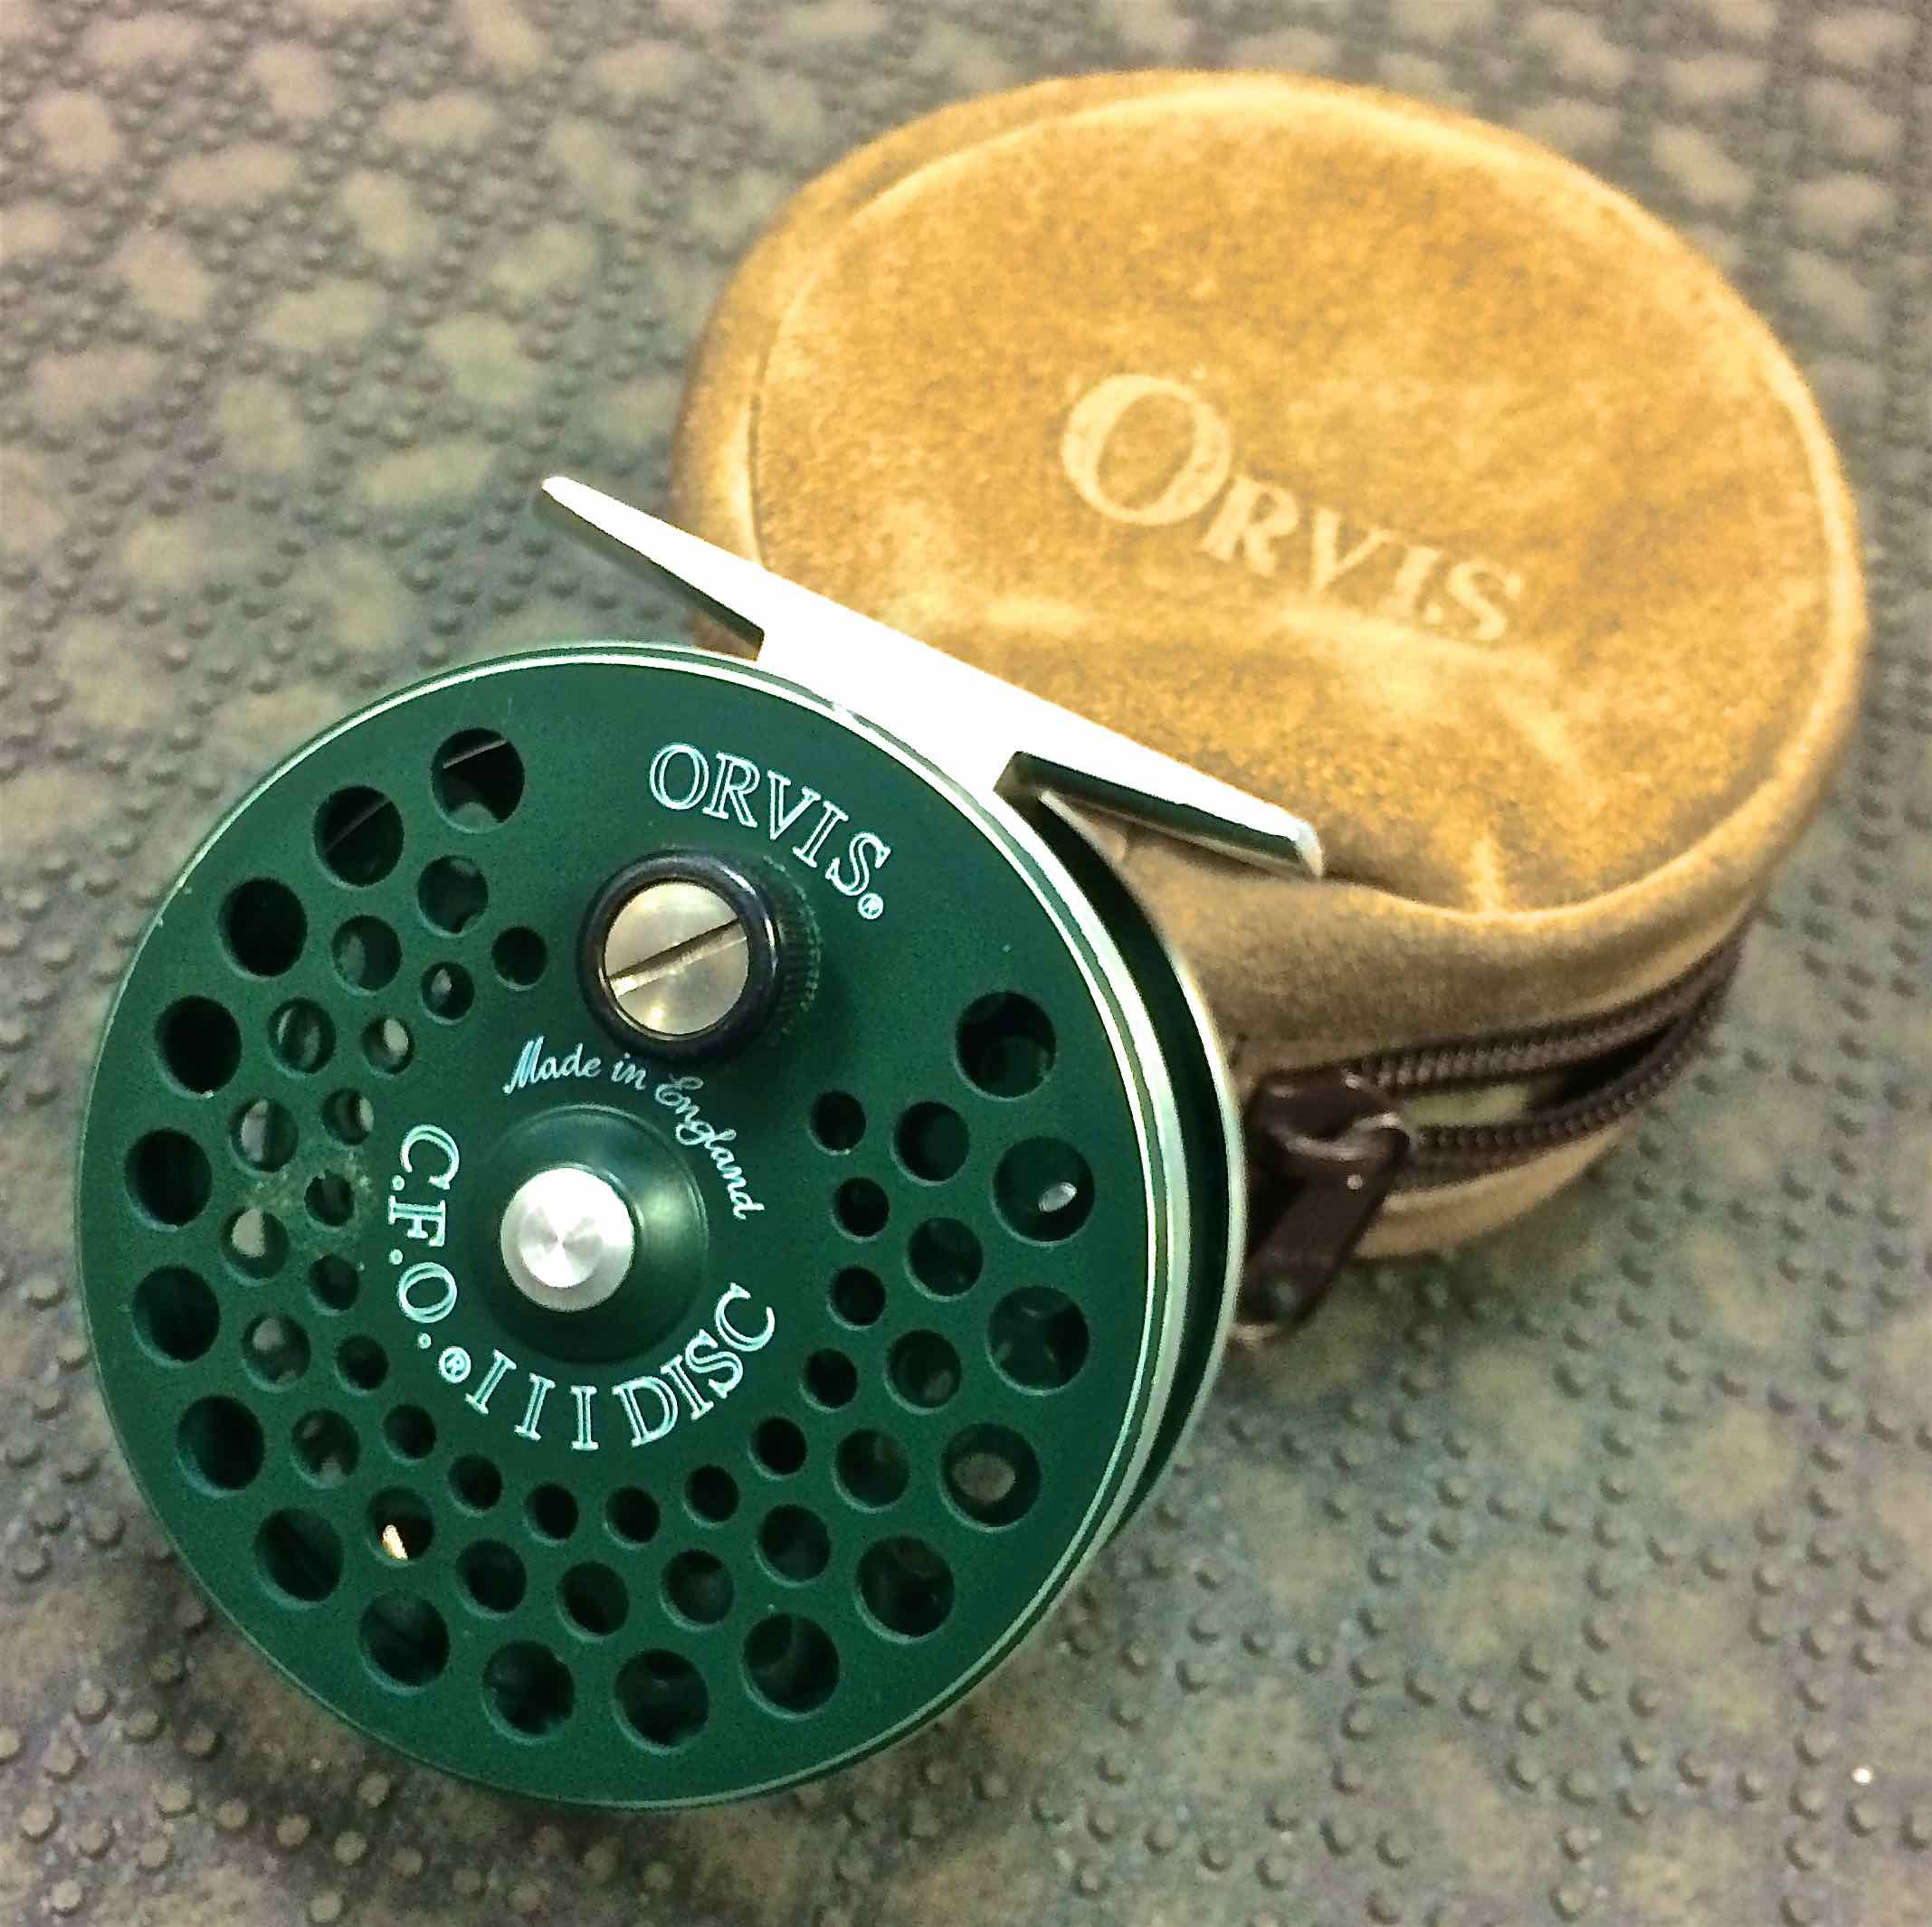 https://thefirstcast.ca/wp-content/uploads/2016/04/Orvis-CFO-III-Disc-Fly-Reel-Spruce-Green-Made-in-England-BB.jpg